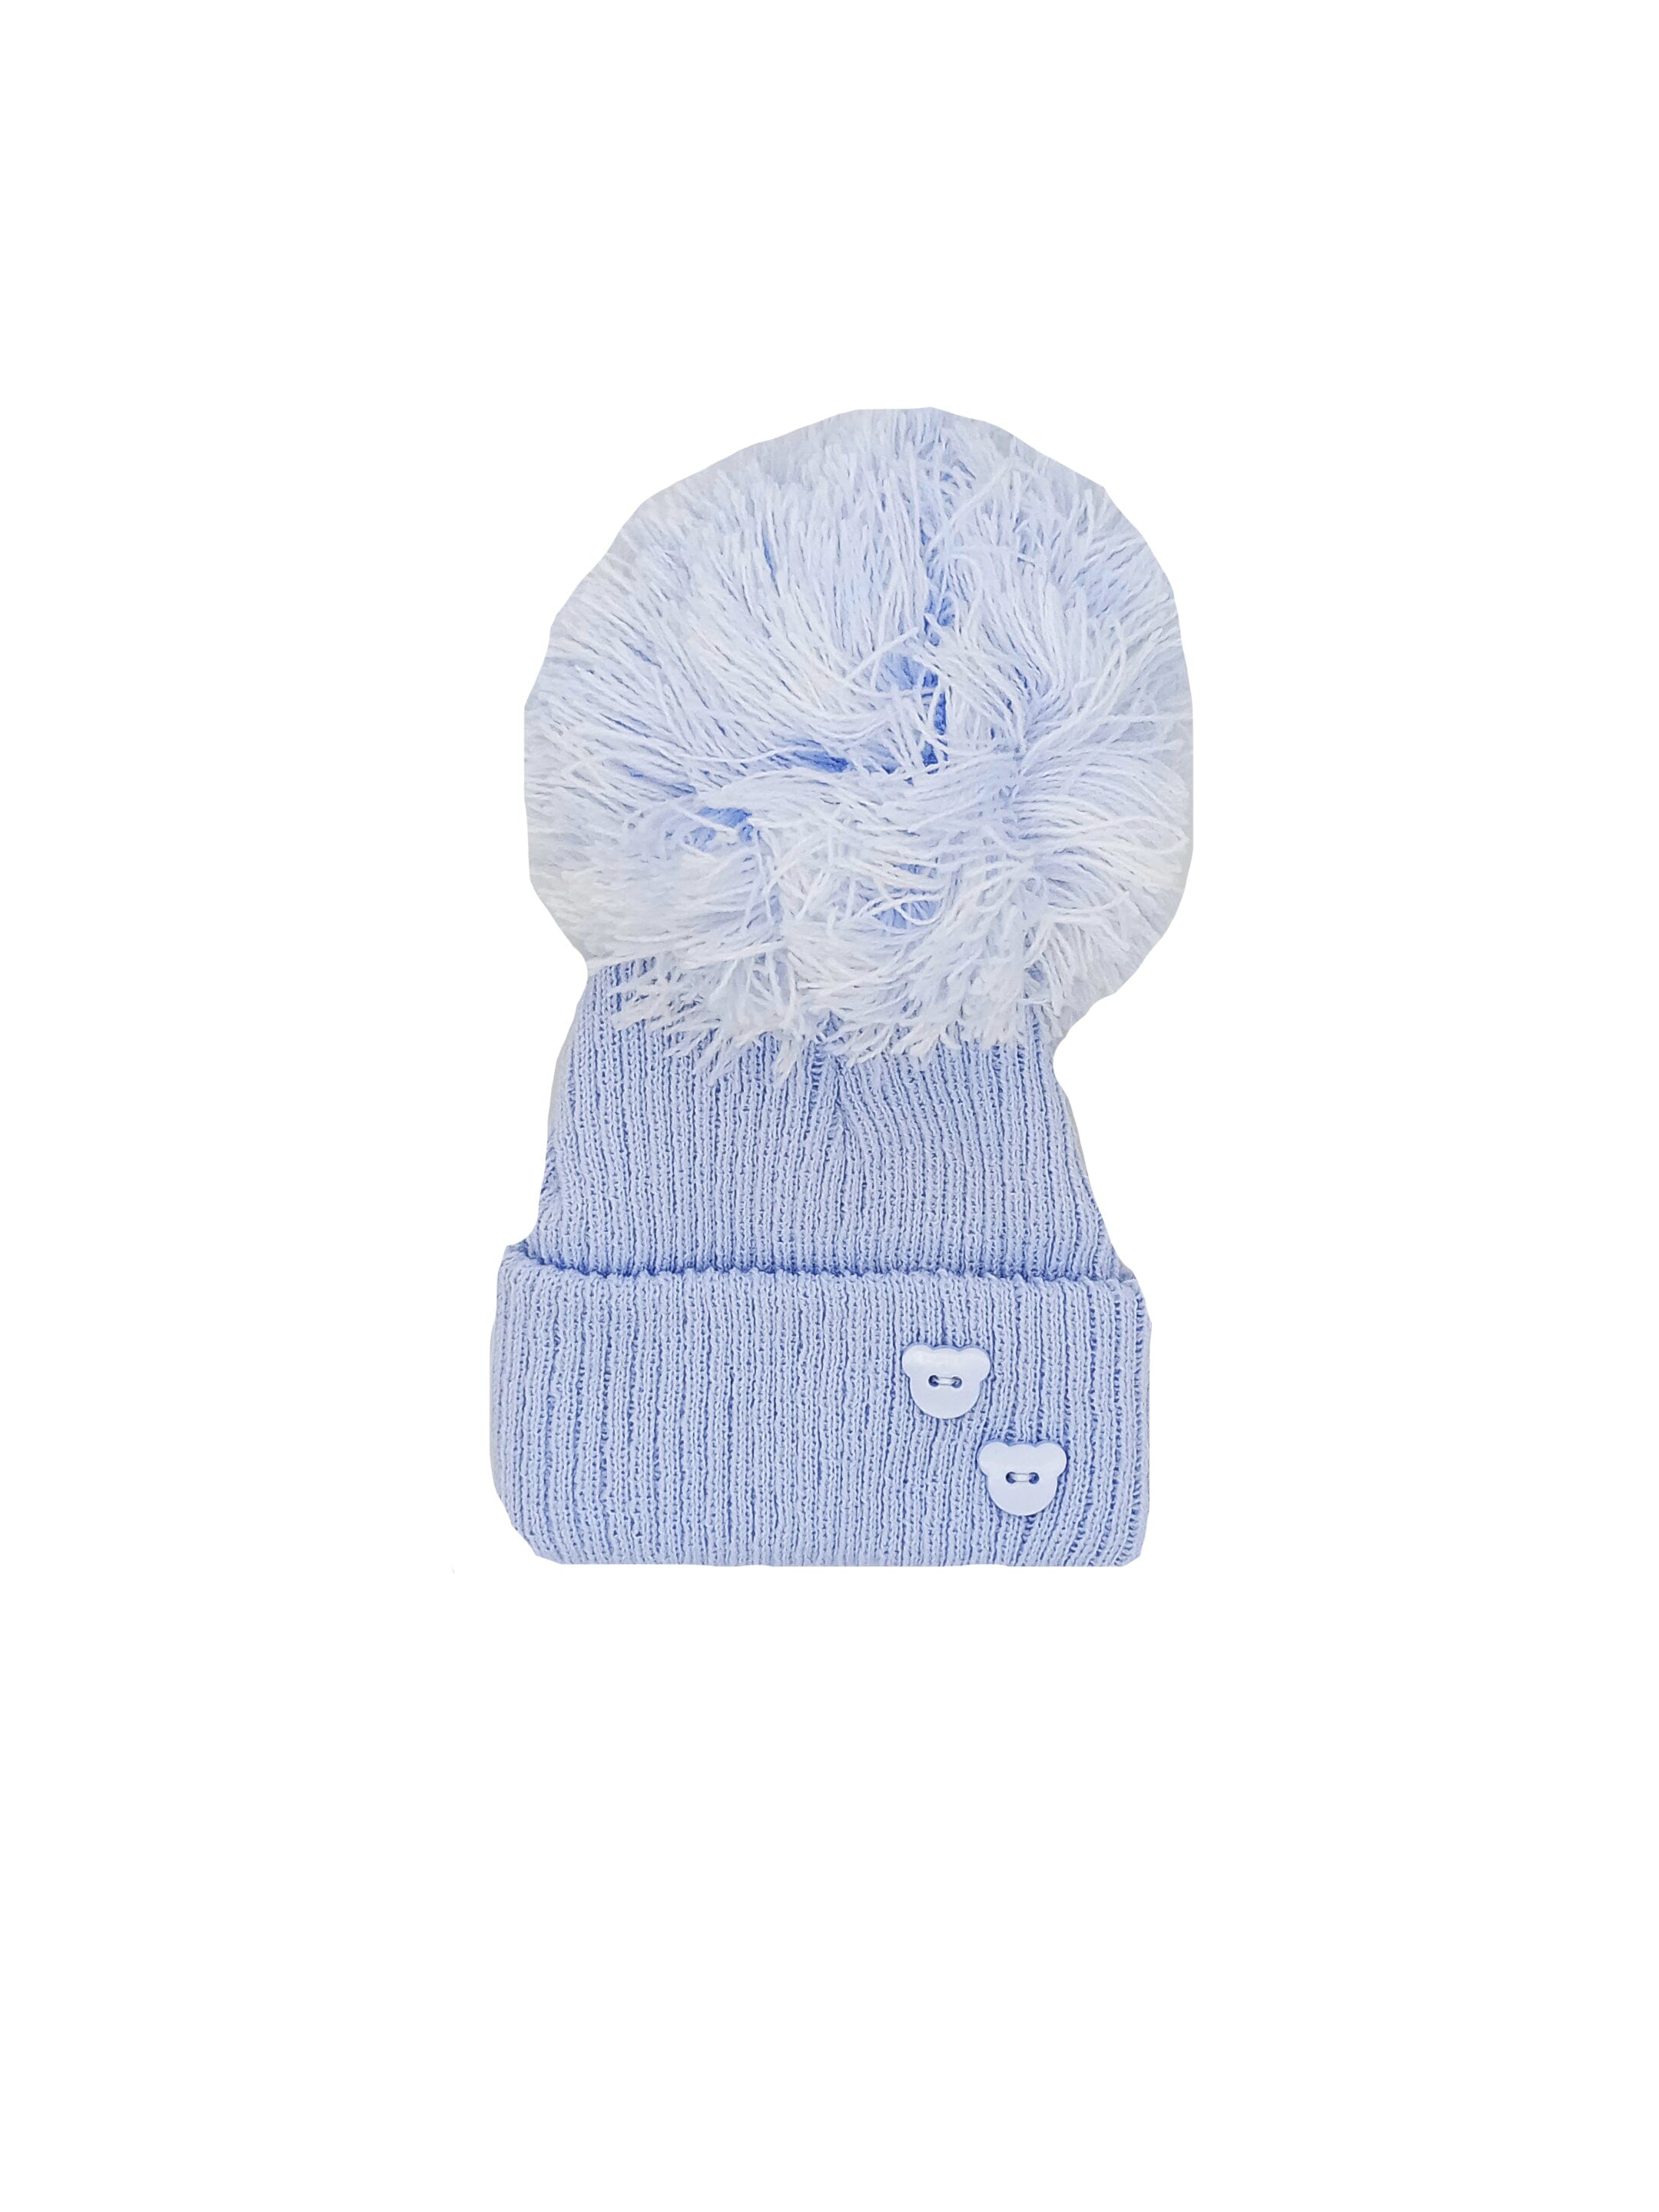 Blue Knitted Pom Pom Hat 5-8lb - Hat - Little Mouse Baby Clothing and Gifts Ltd